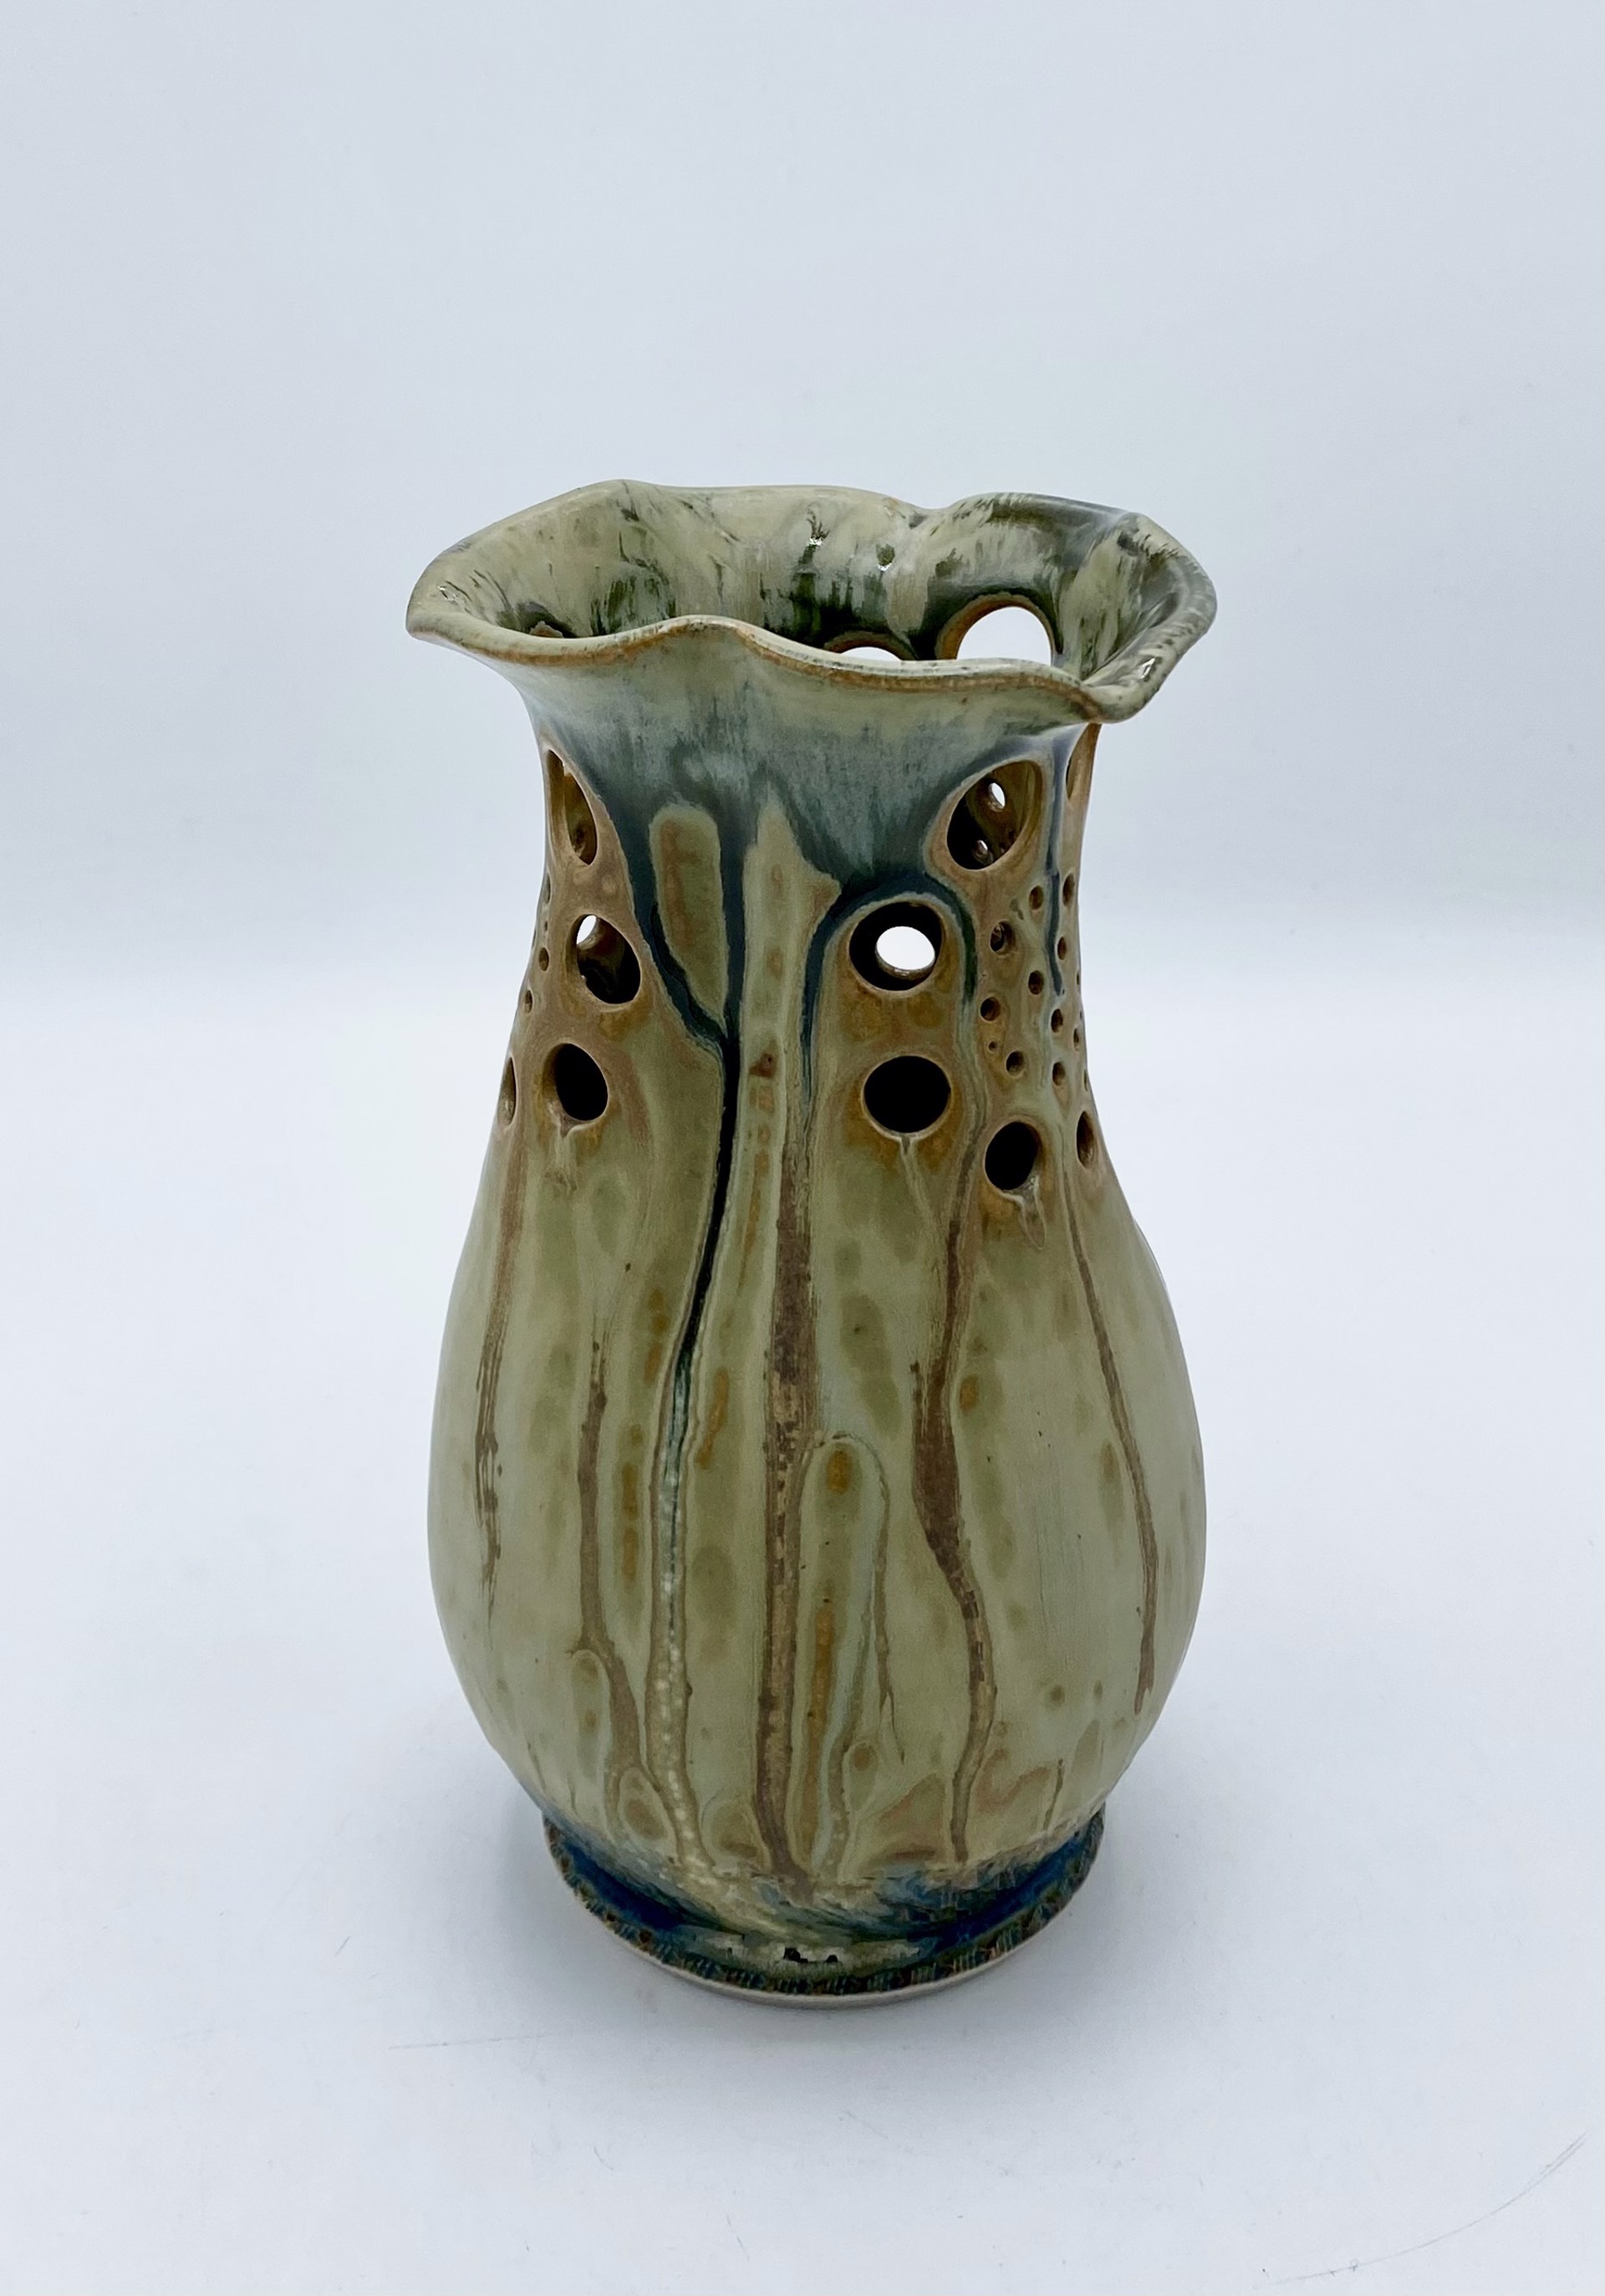 Small Vase 1 by J. Wilson Pottery